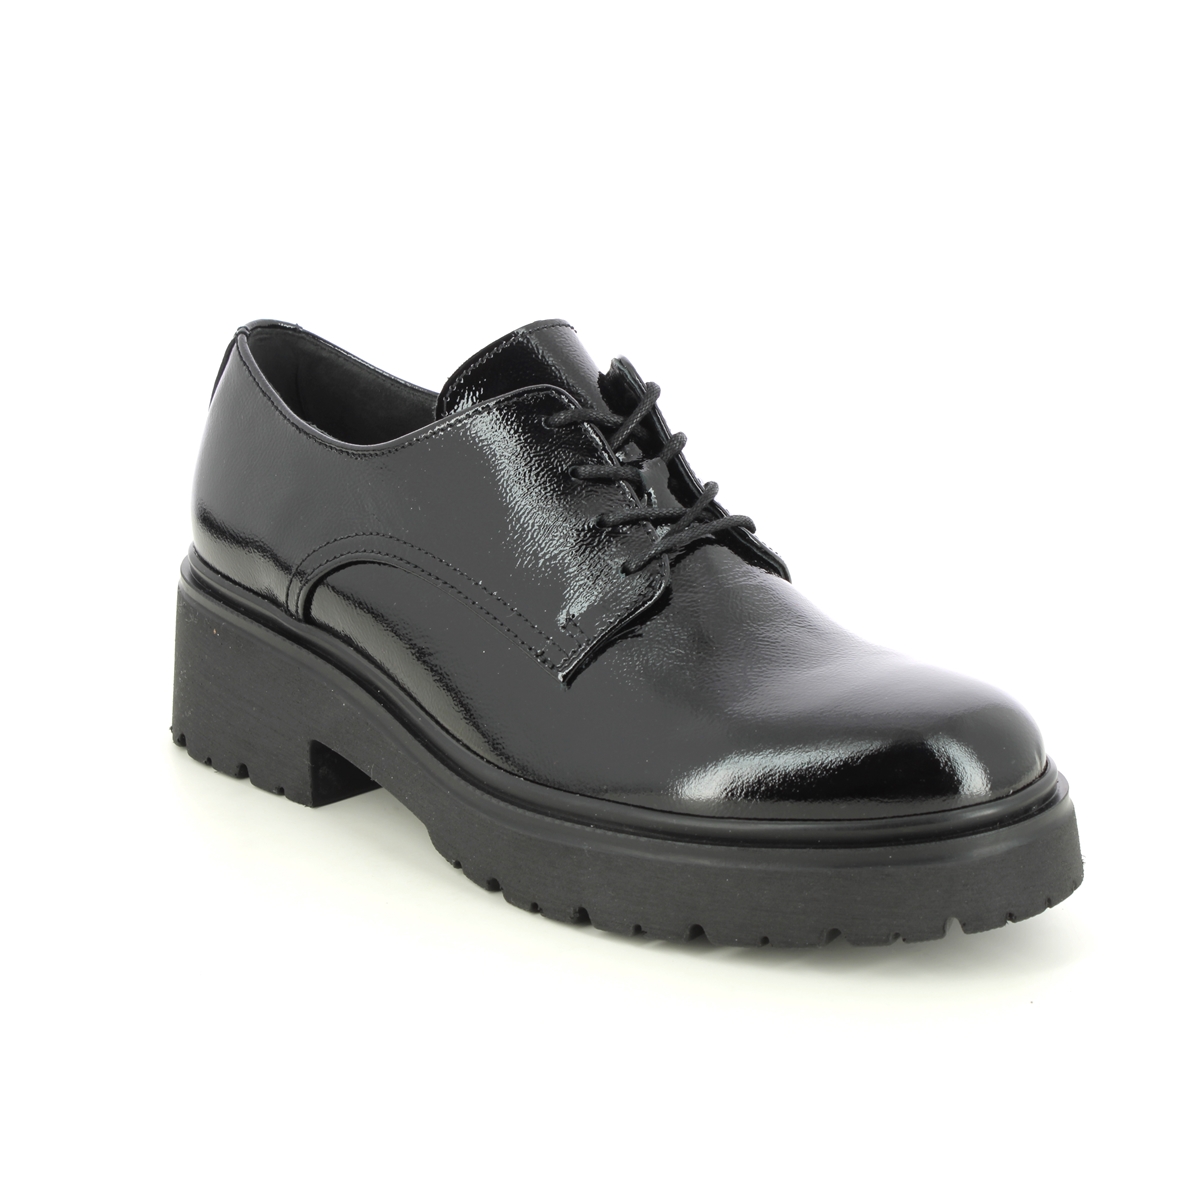 Gabor Exchange Black patent Womens Brogues 35.234.97 in a Plain Leather in Size 6.5